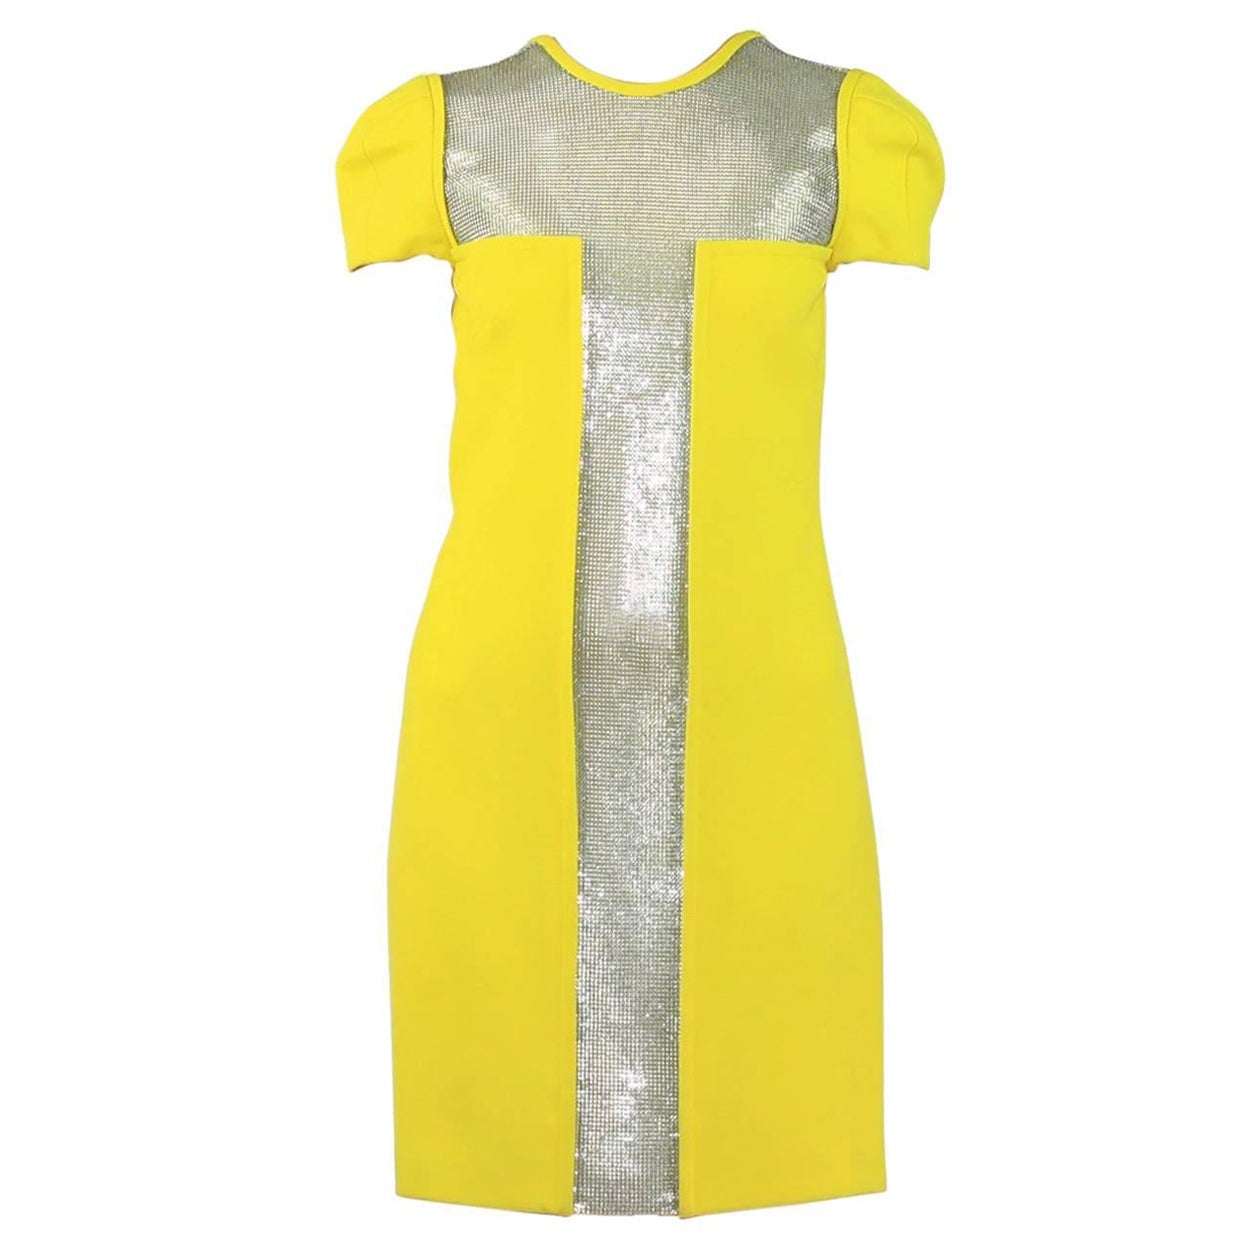 F/2012 look # 21 NEW VERSACE YELLOW DRESS with METAL CHAIN MESH 38 - 2 For Sale